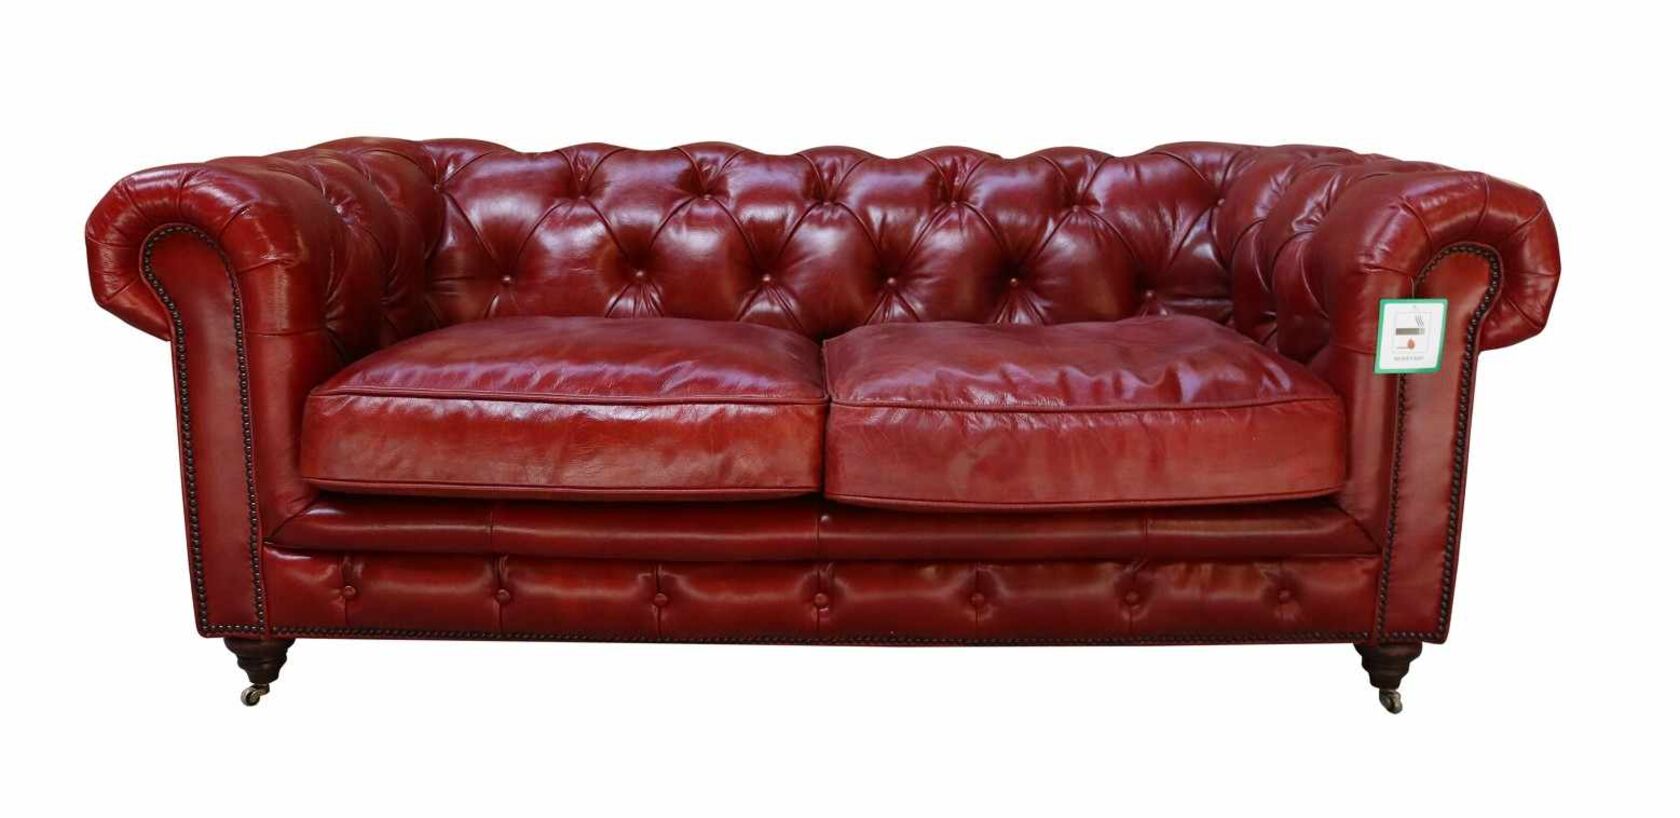 Vintage Distressed Chesterfield 2, Cranberry Leather Sofa